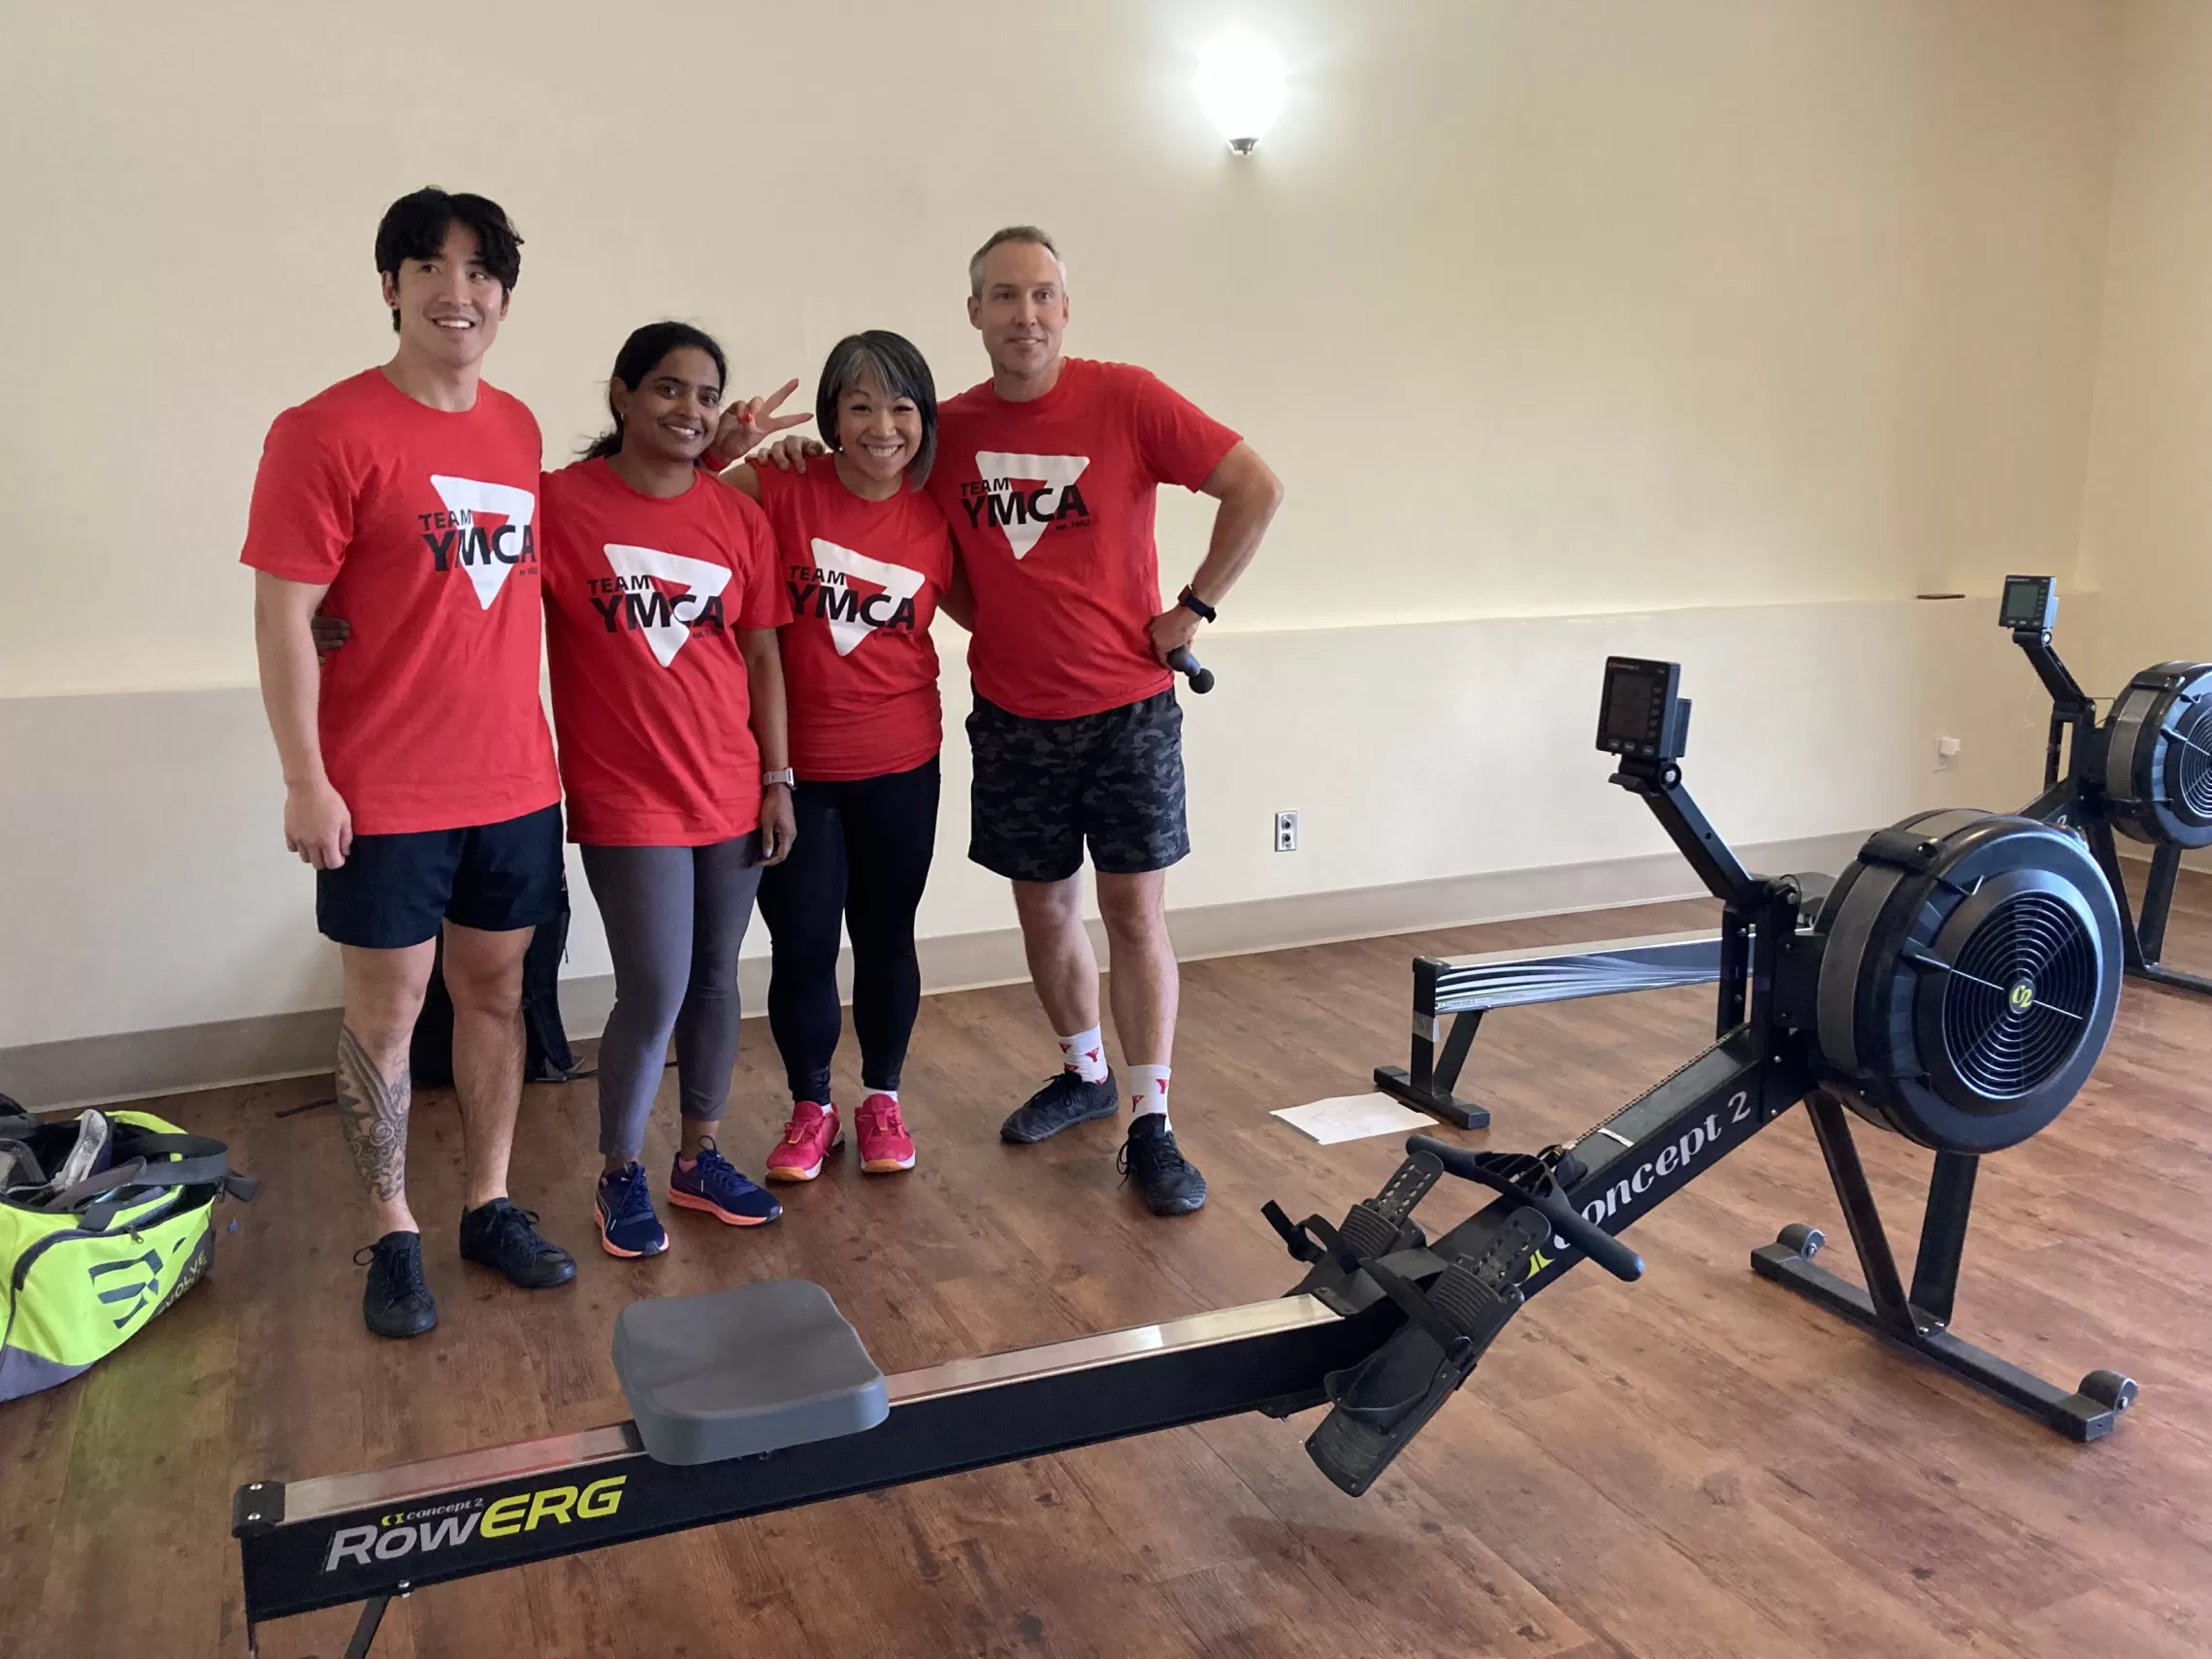 Team YMCA poses with rowing machines, donning red YMCA t-shirts and ready for the action.